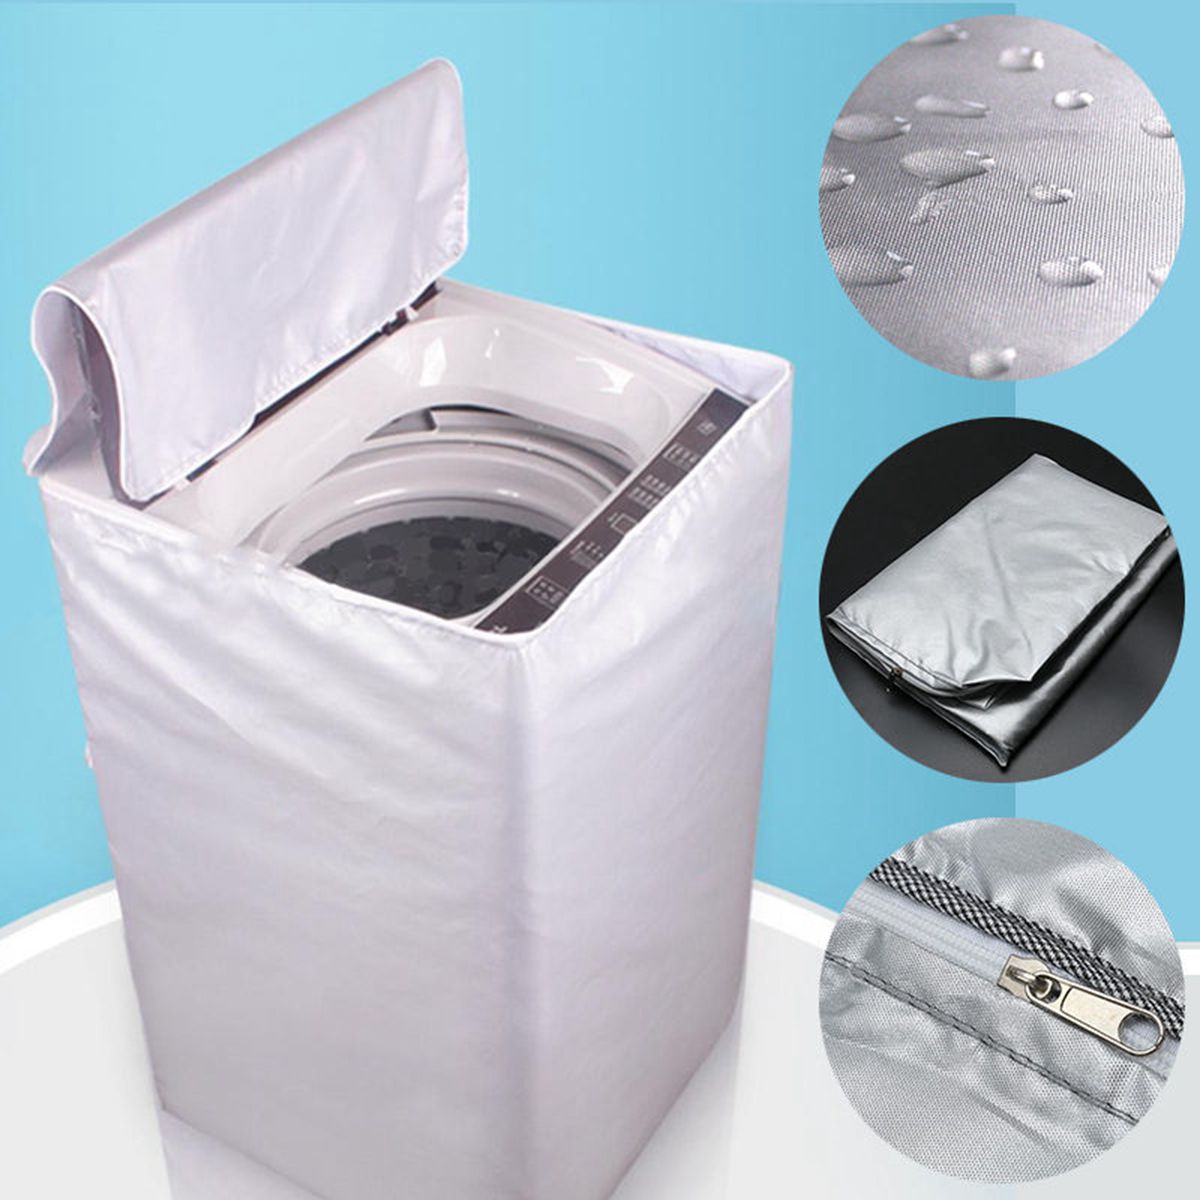 Washing Machine Cover Silver Water-proof Washer/Dryer Cover Dustproof 13